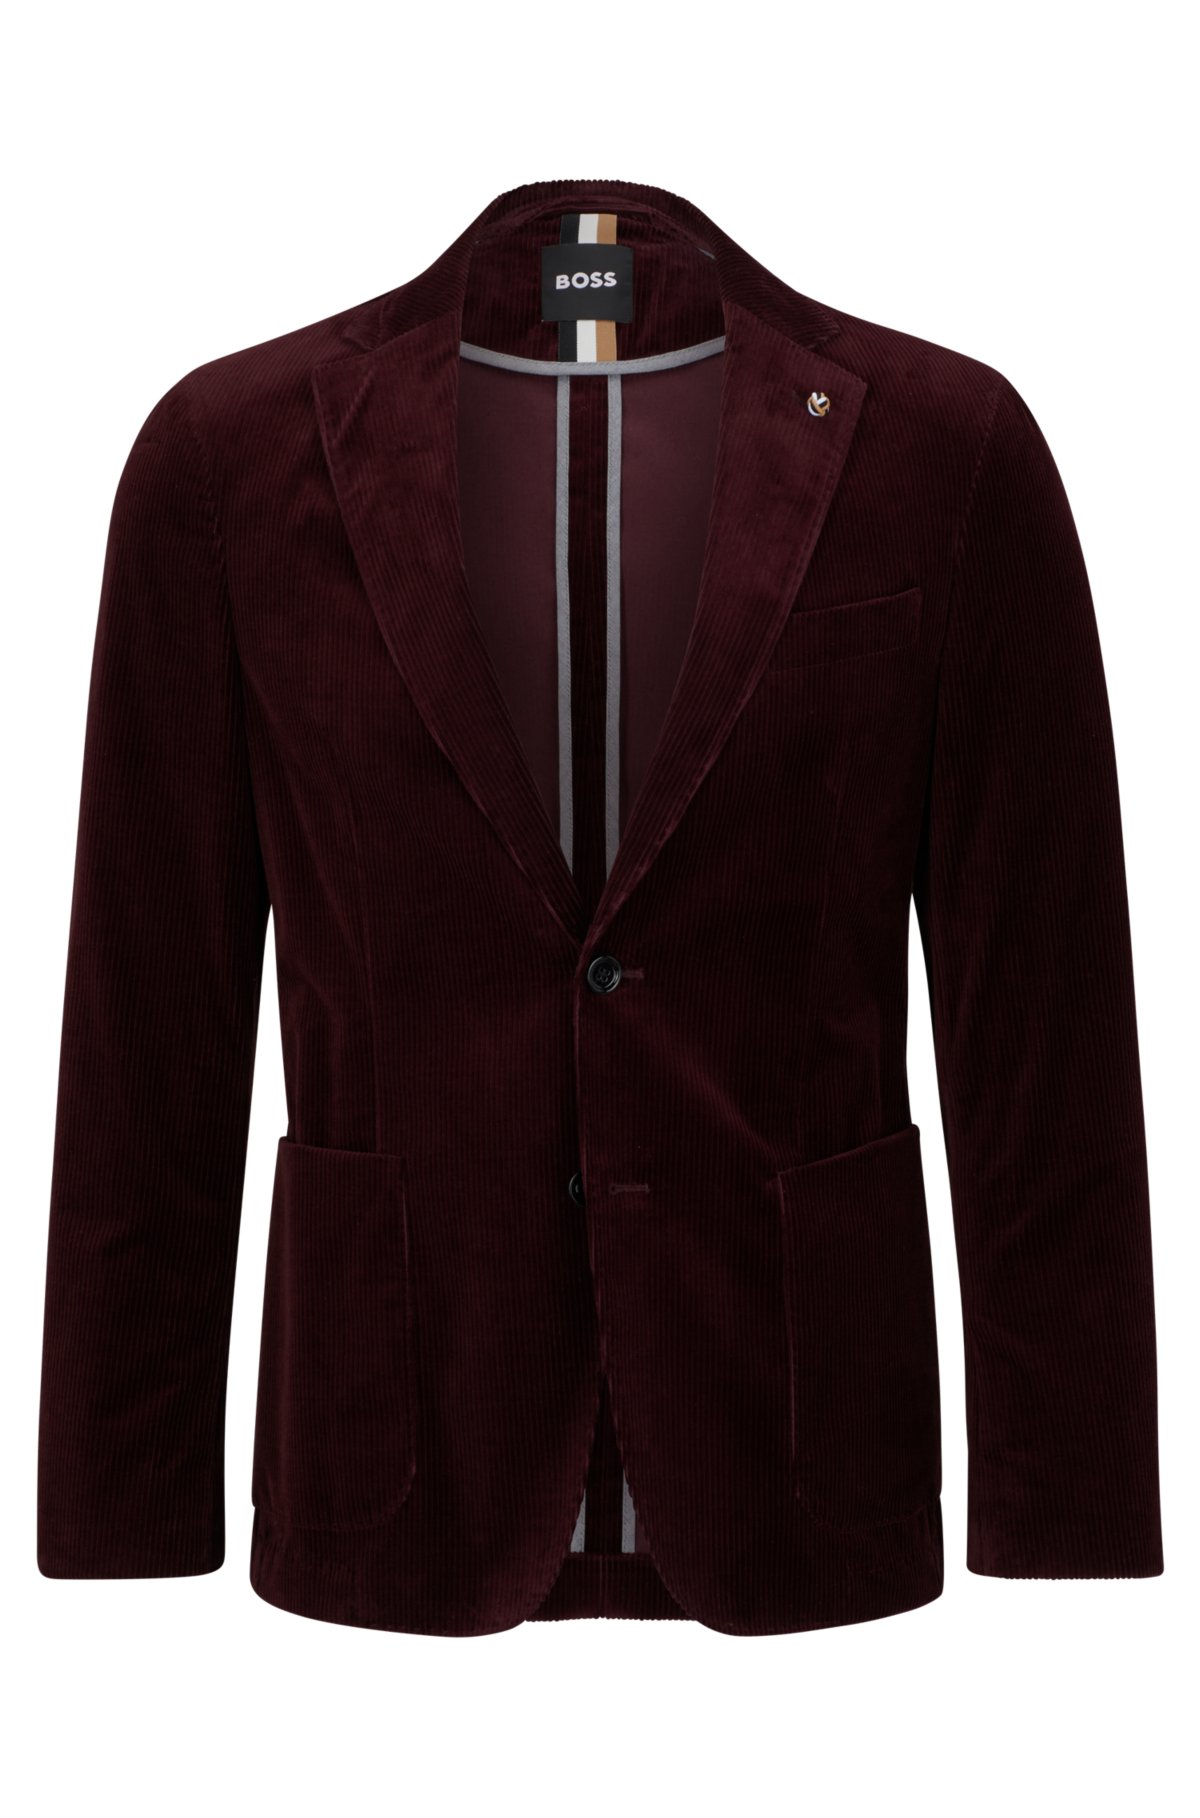 BOSS - Slim-fit jacket in micro-patterned stretch cotton